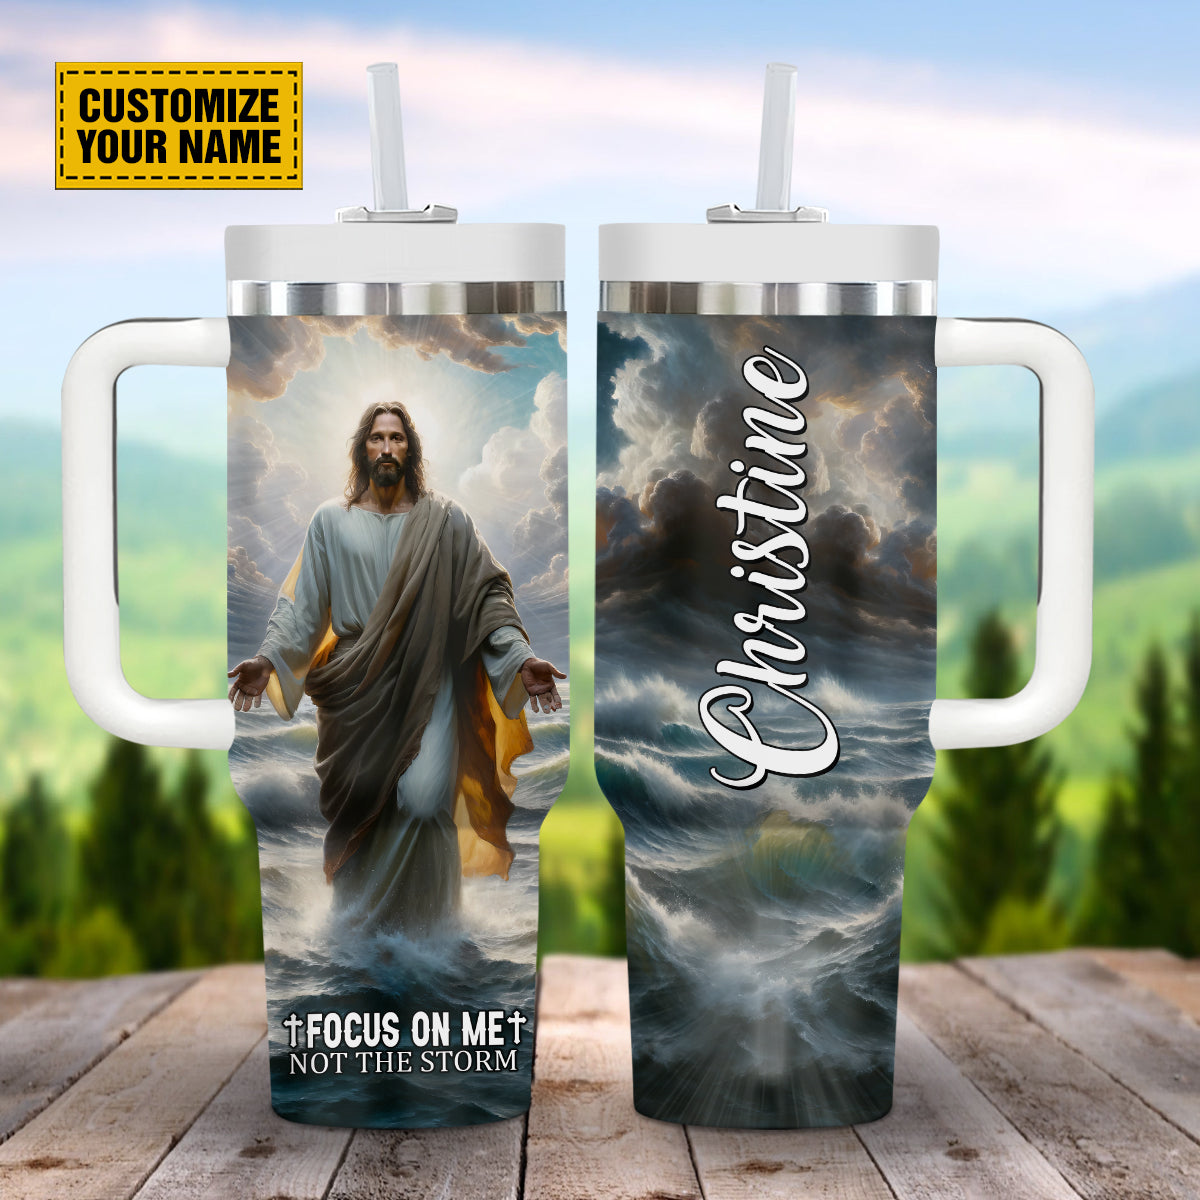 Teesdily | Customized Jesus Portrait Art Water Tumbler, Focus On Me Not The Storm Insulated Cup, Jesus Walk On Water 40Oz Tumbler With Handle & Straw